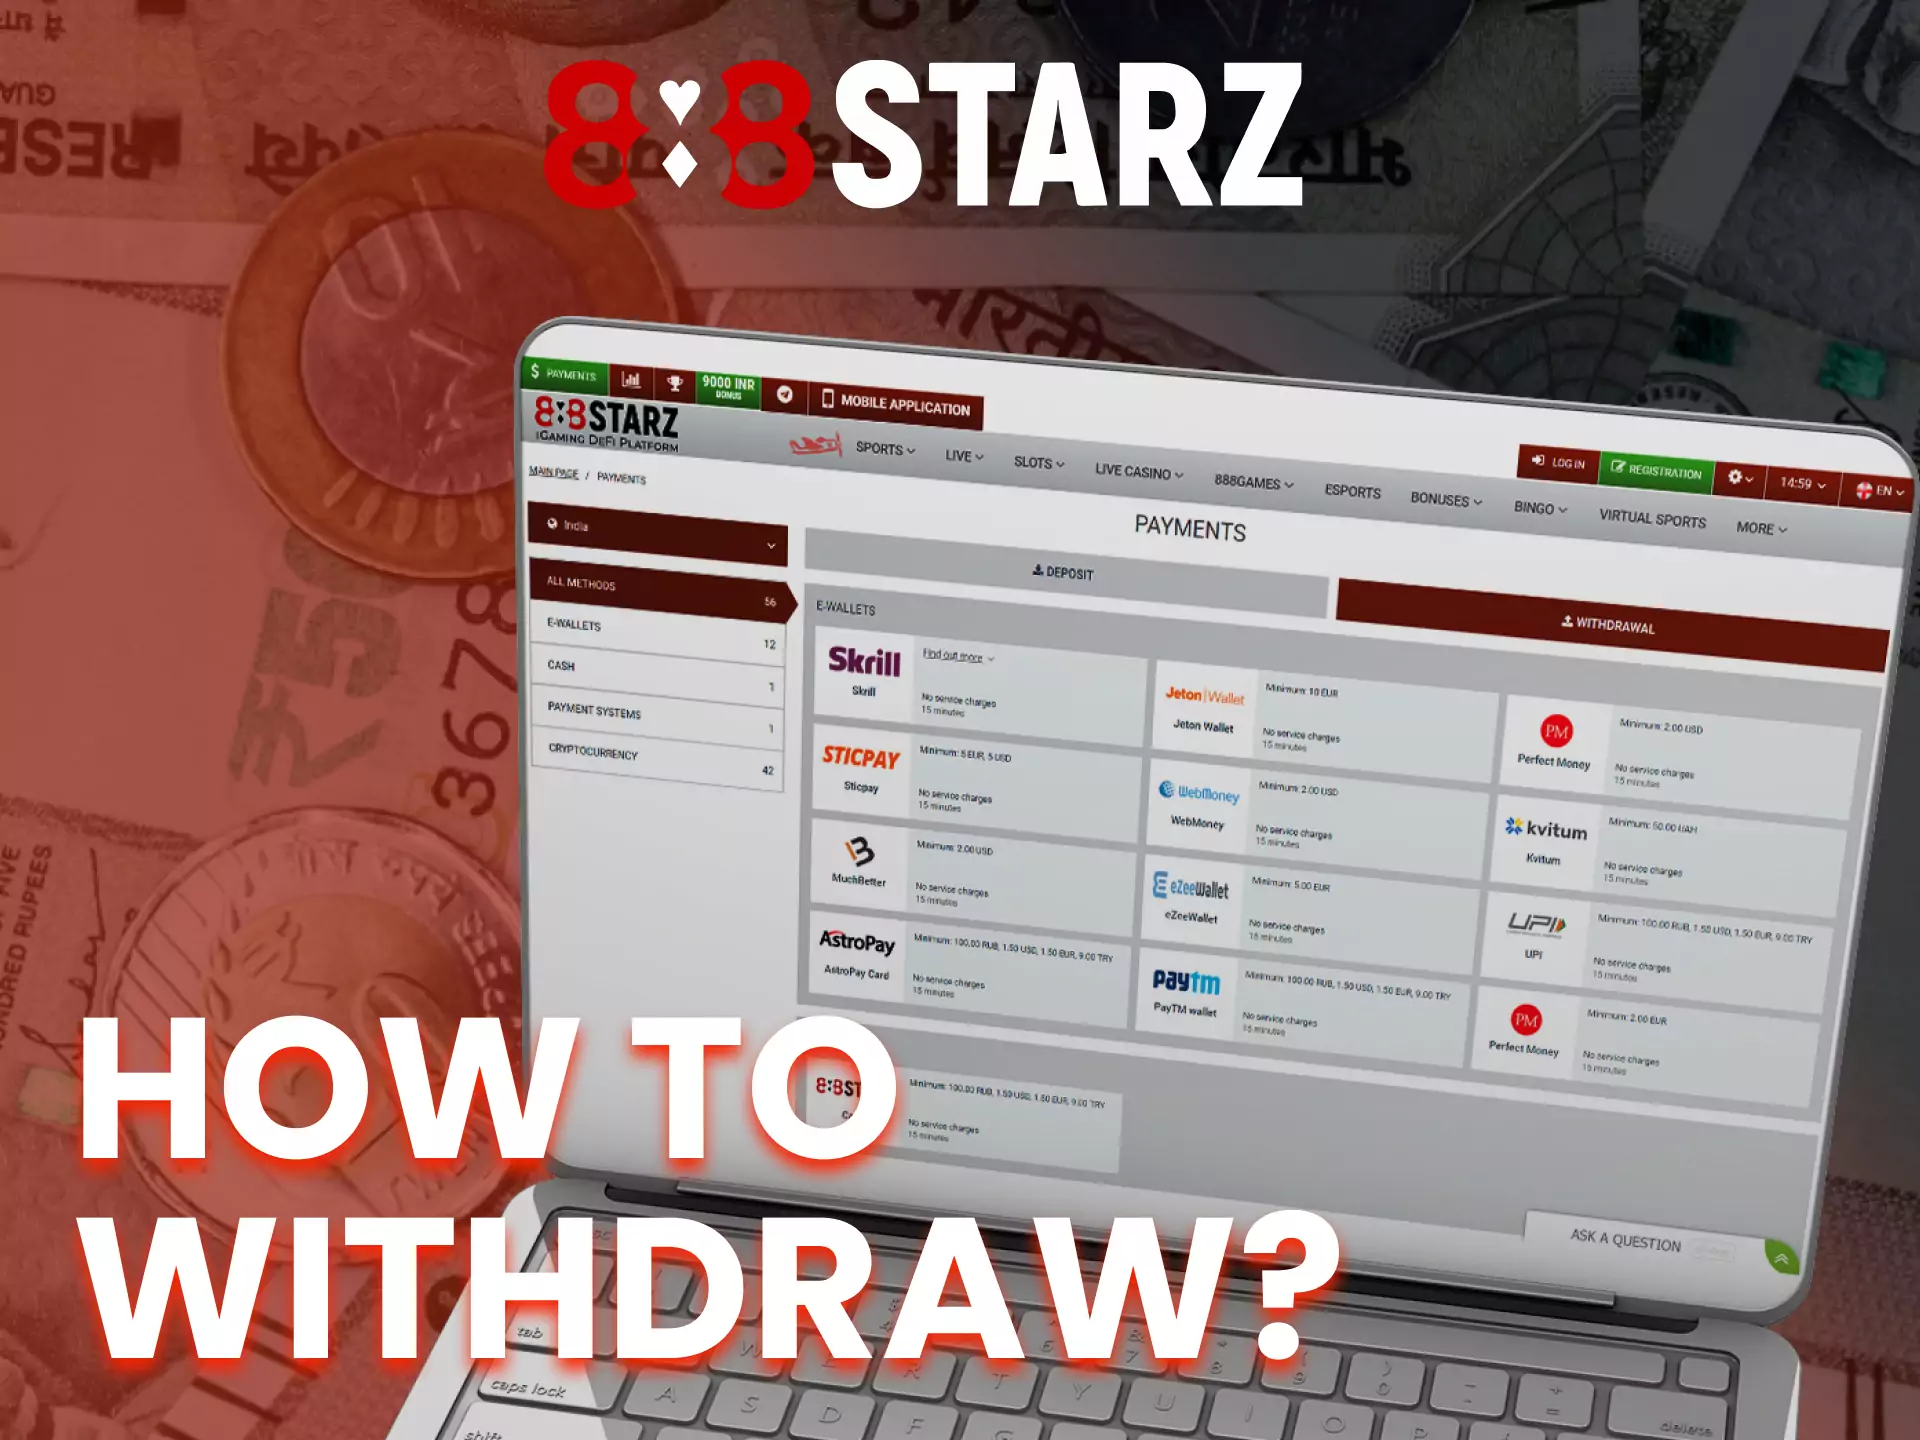 Withdraw money from 888starz without any troubles.